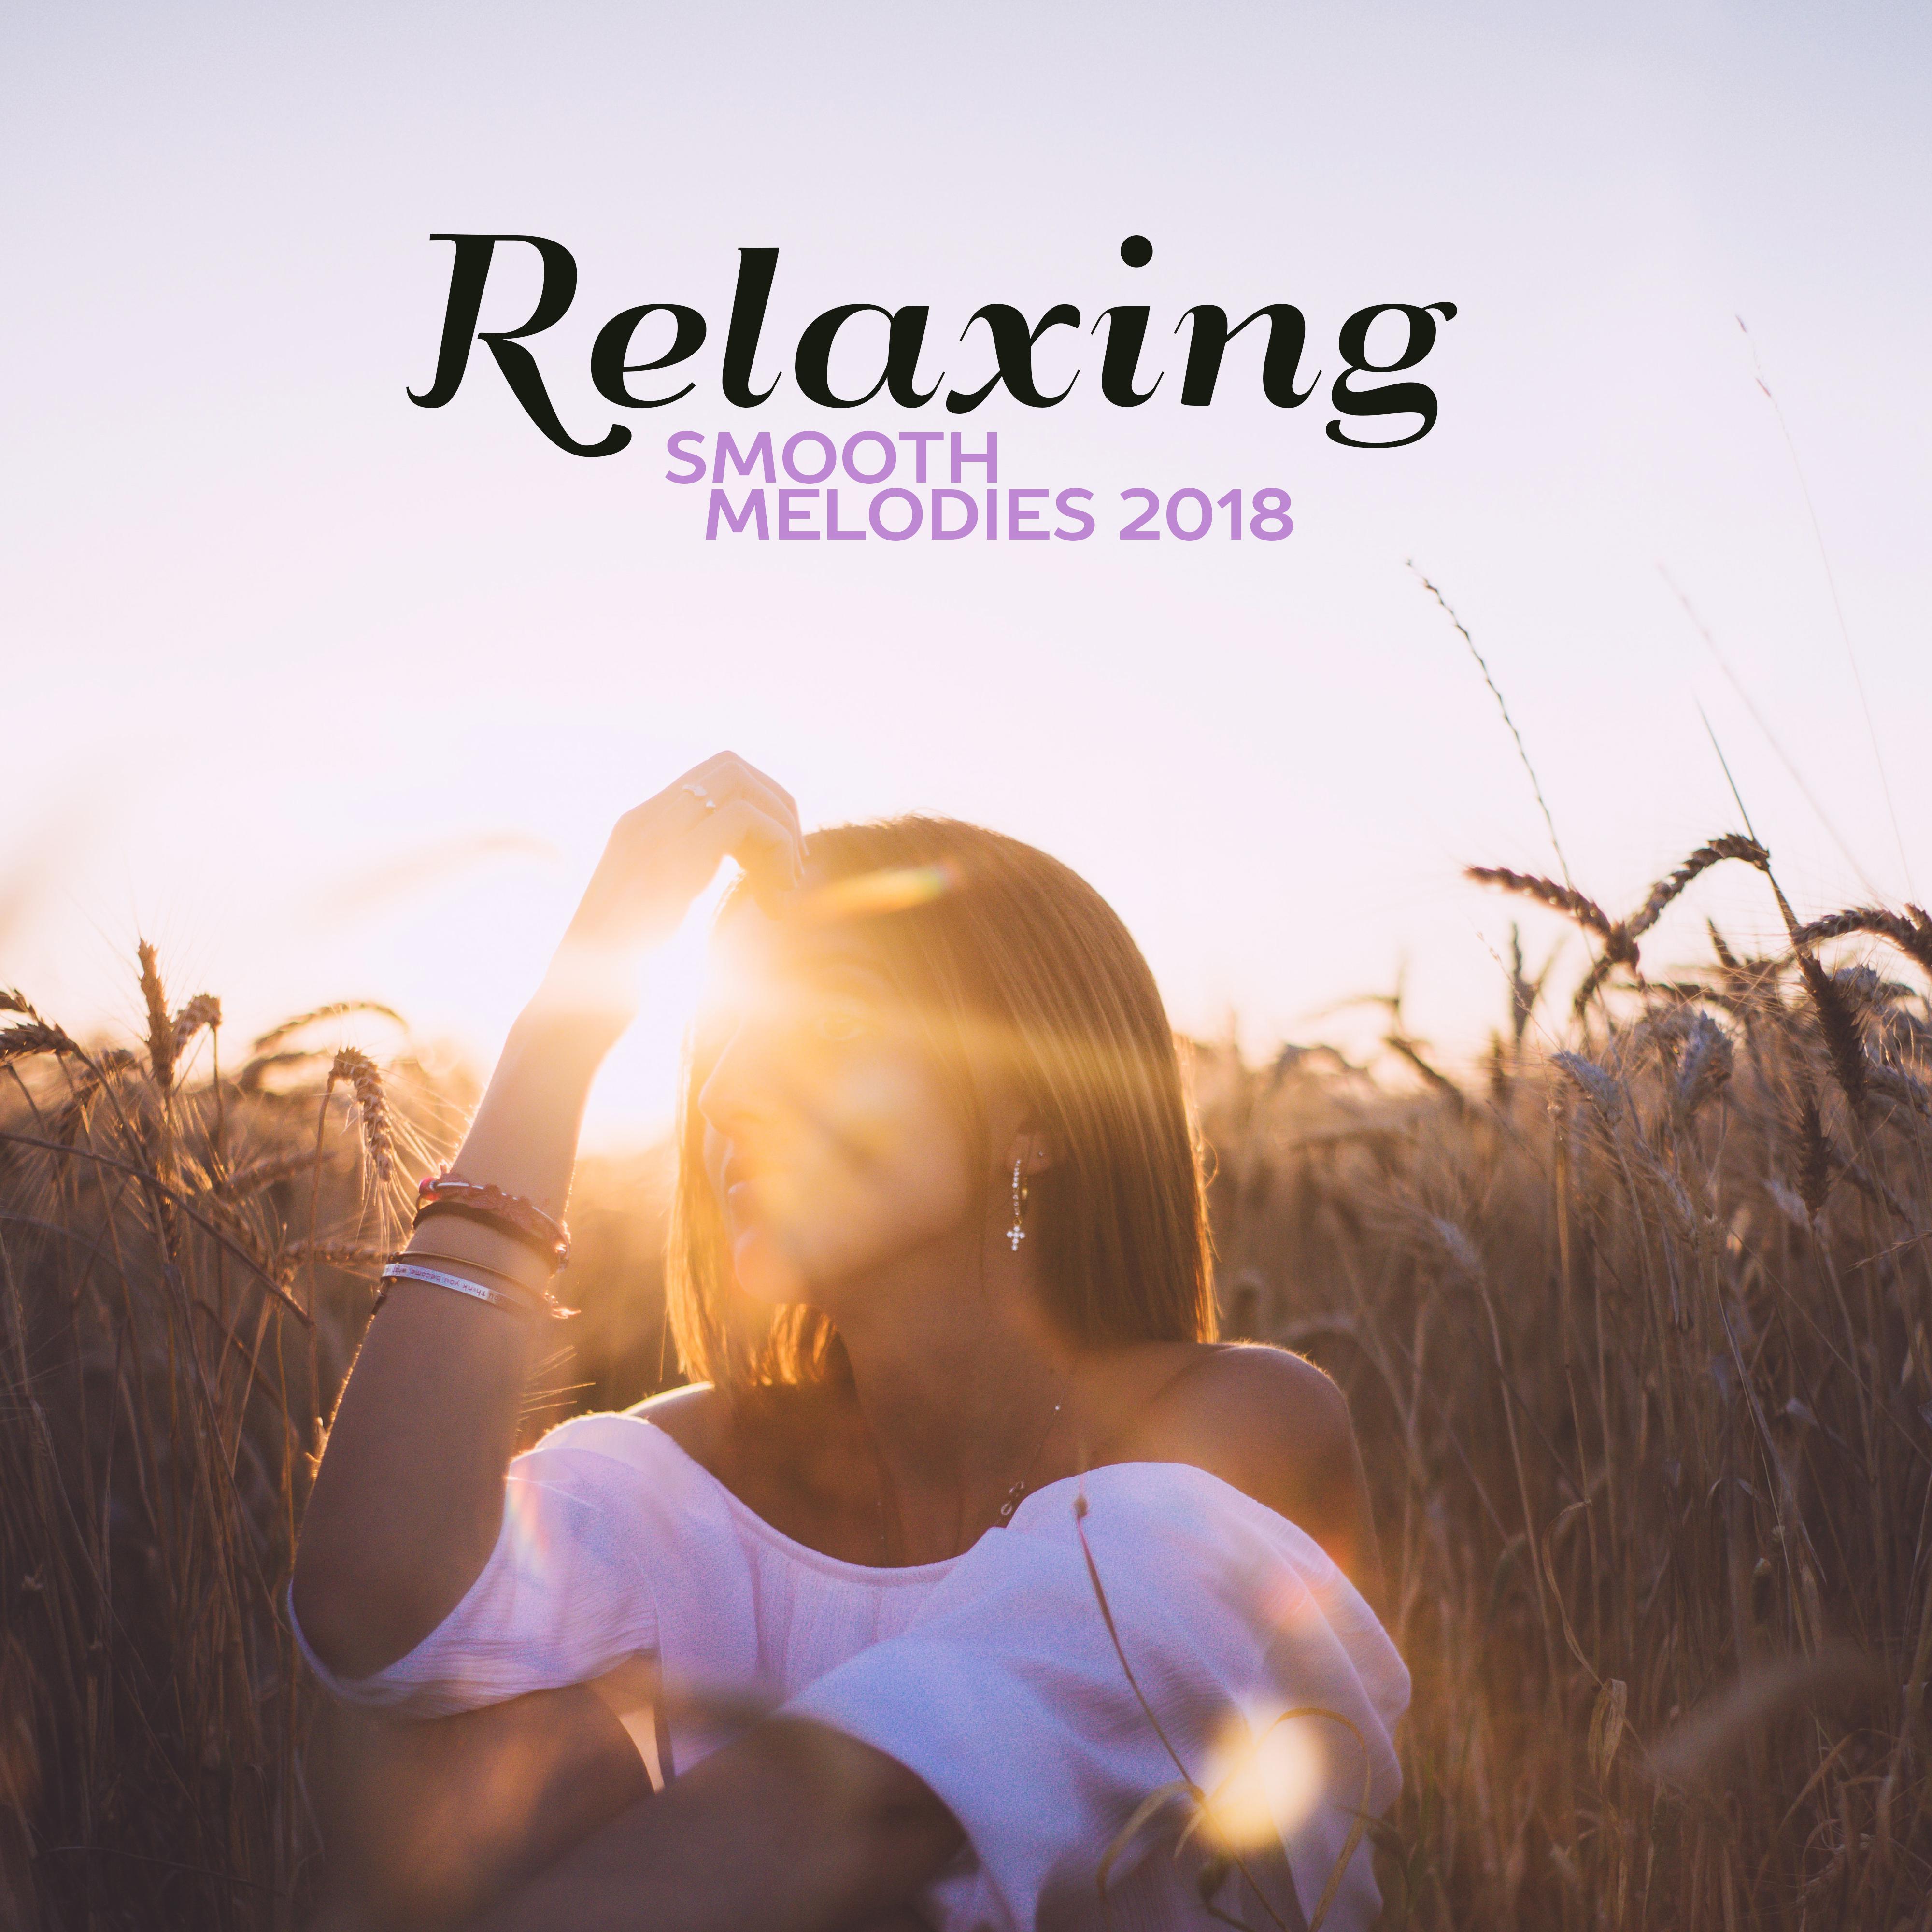 Relaxing Smooth Melodies 2018